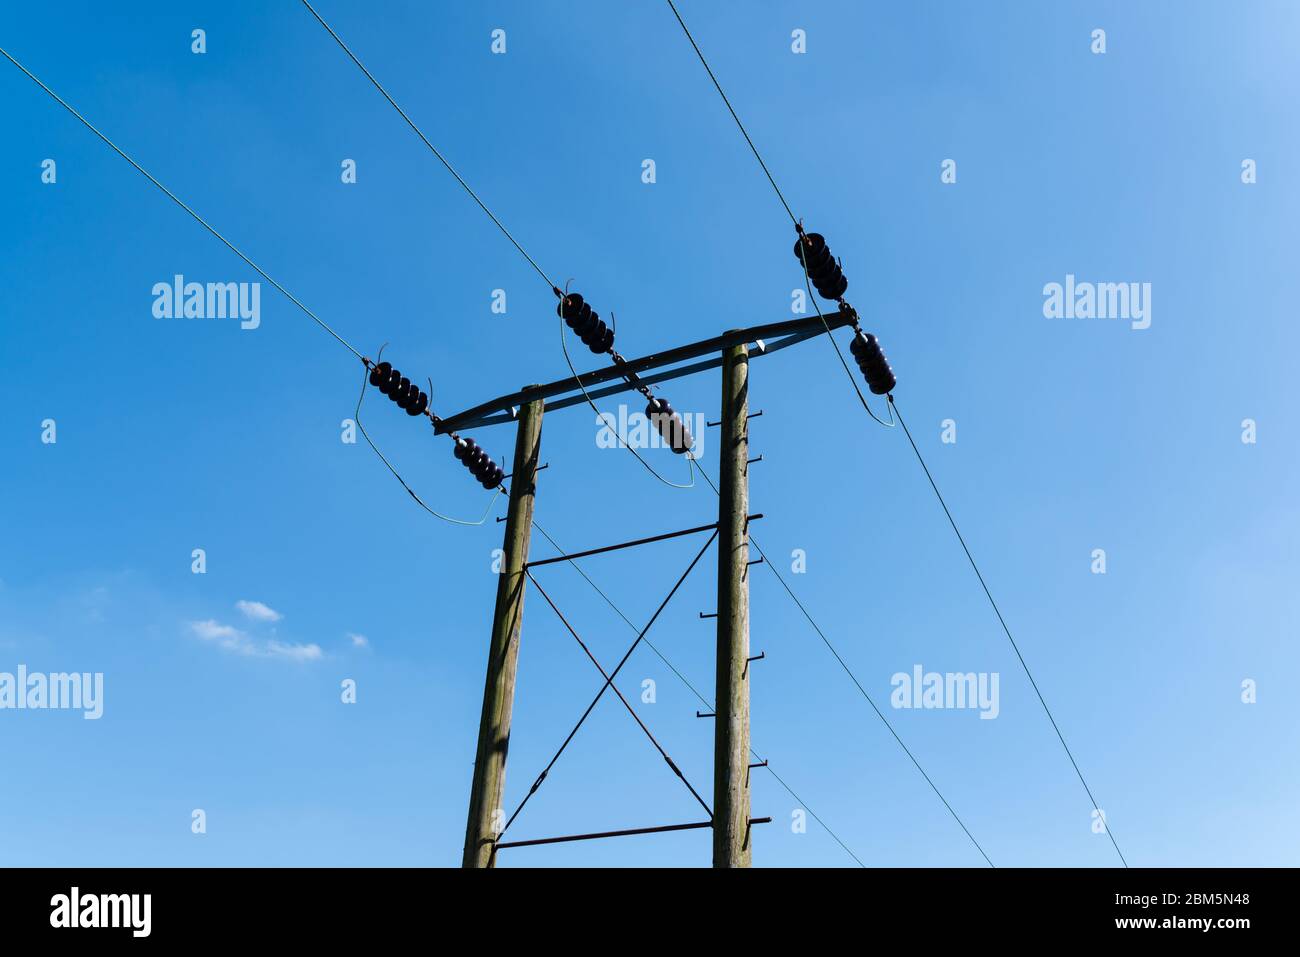 Electric cables and wooden pylon set against a blue sky Stock Photo